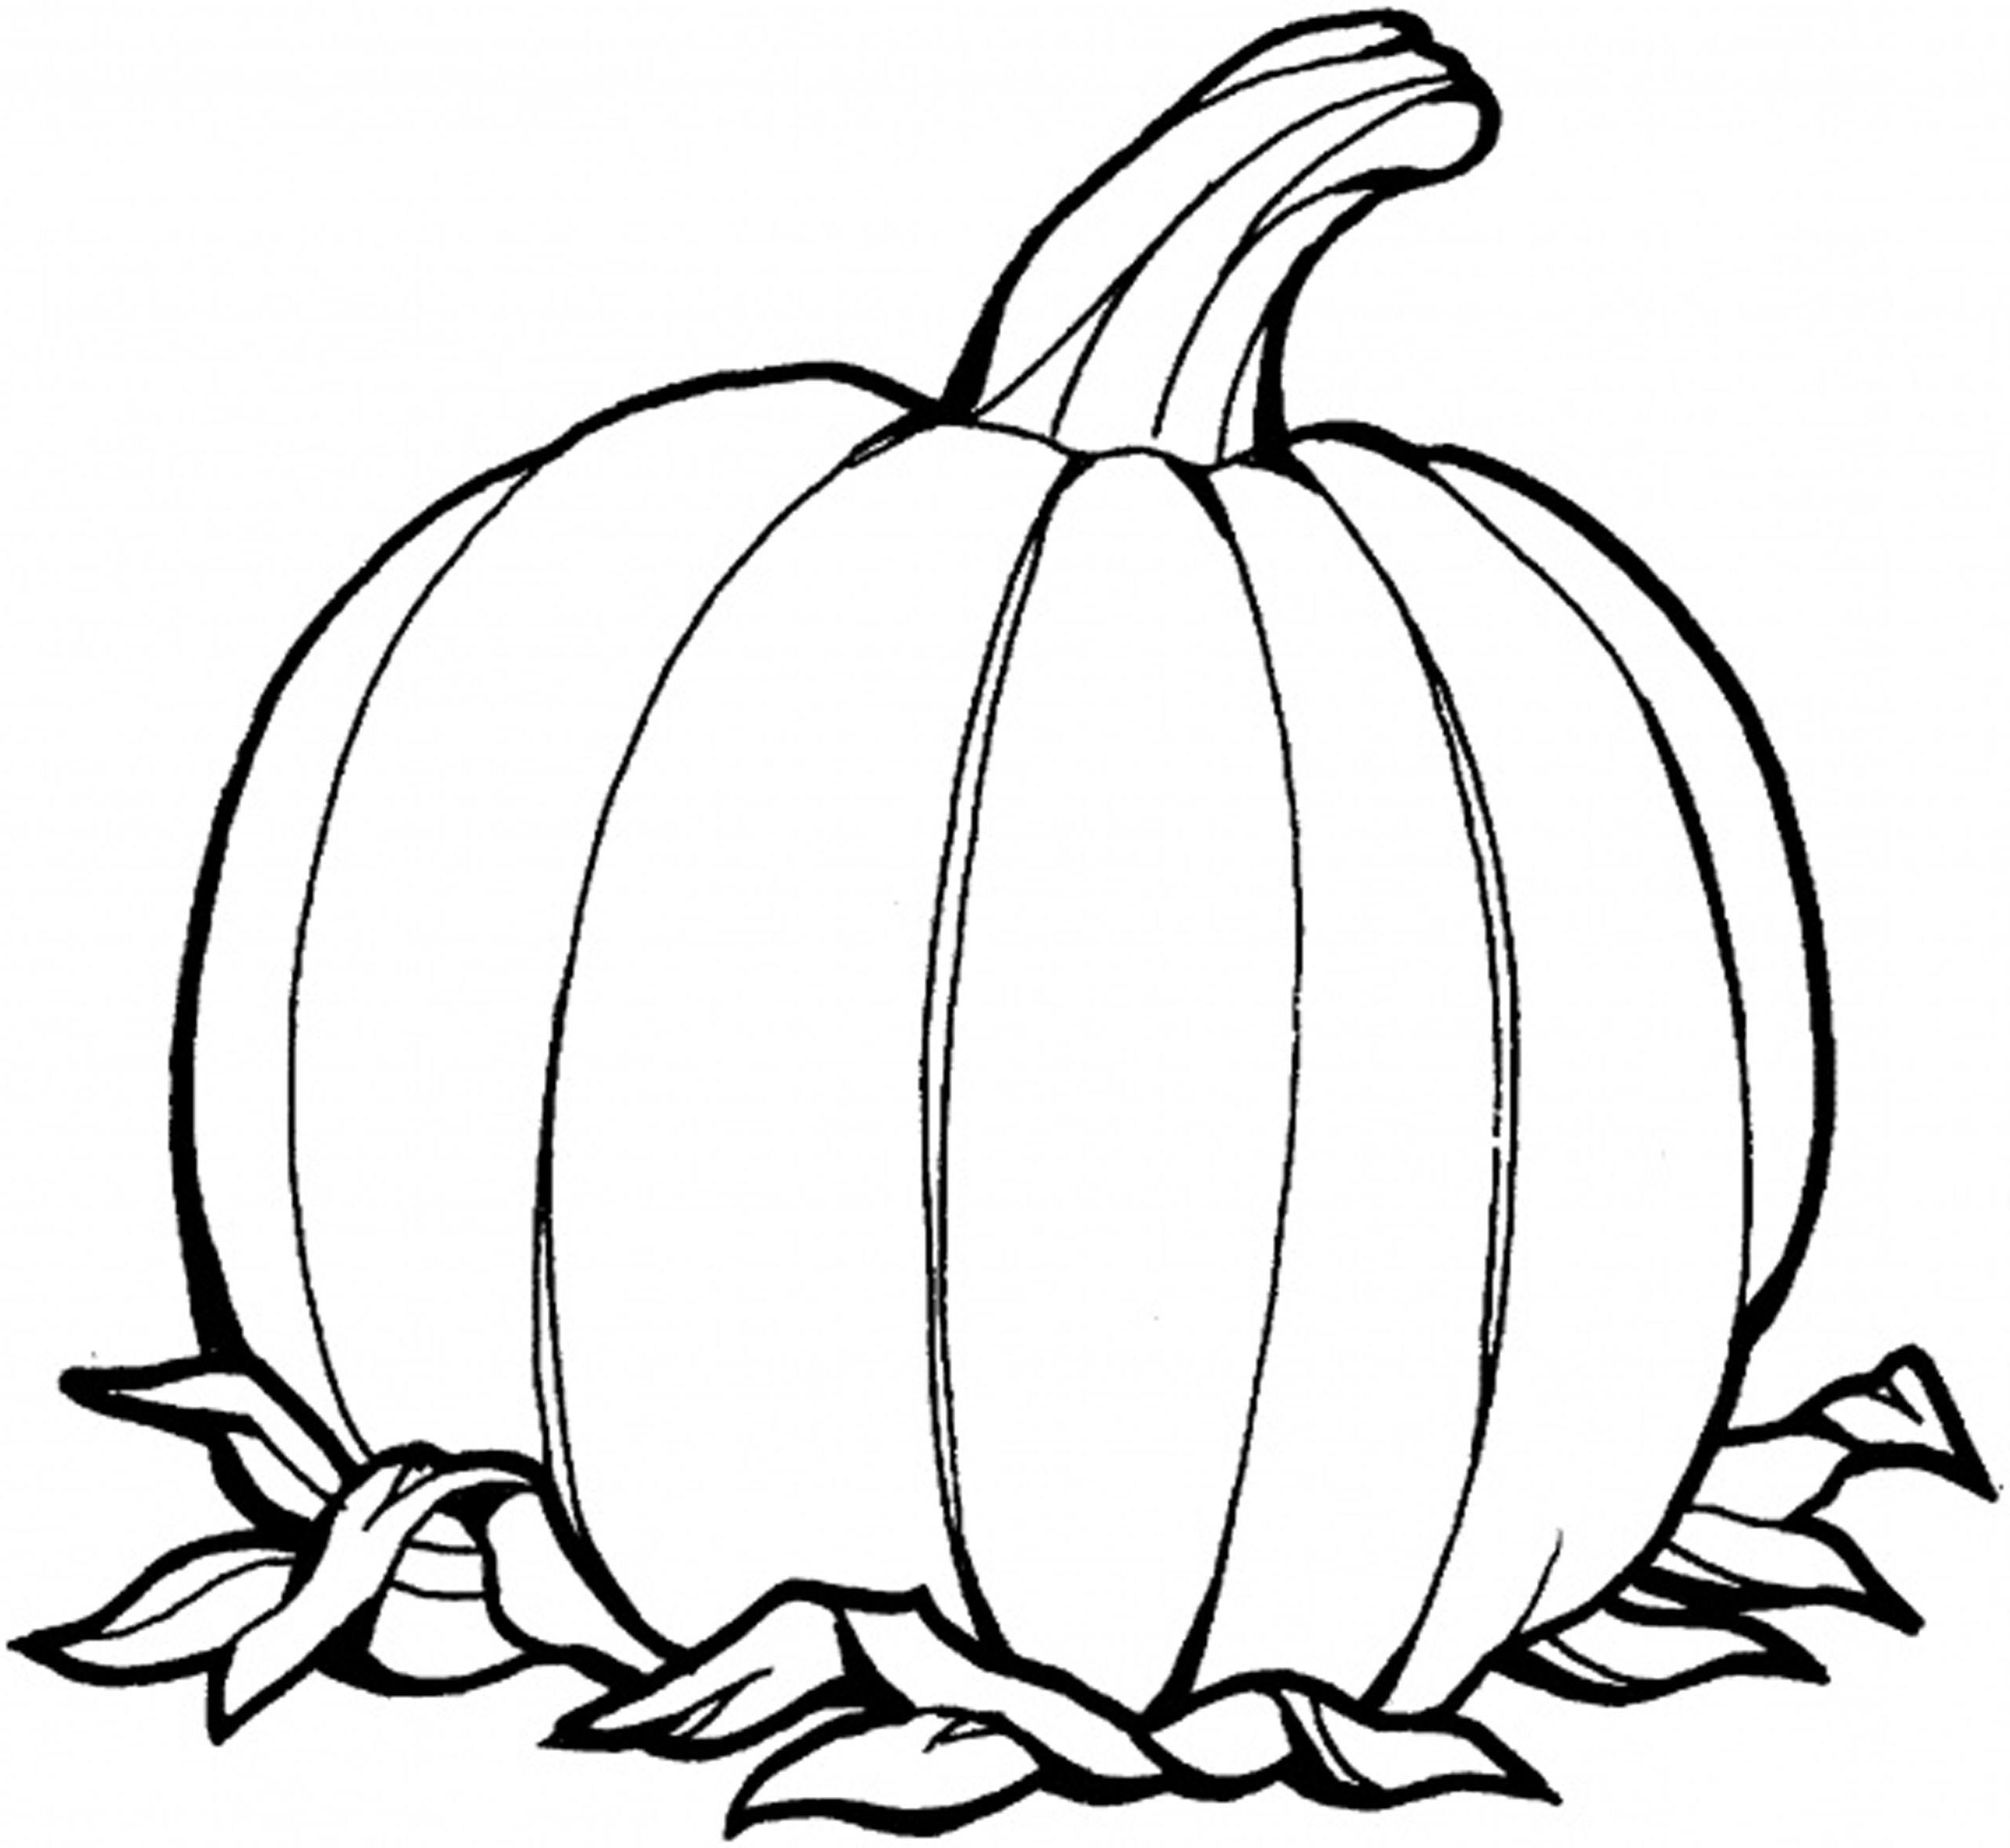 Pumpkin Patch Coloring Pages Free Printable Cakrawalanews